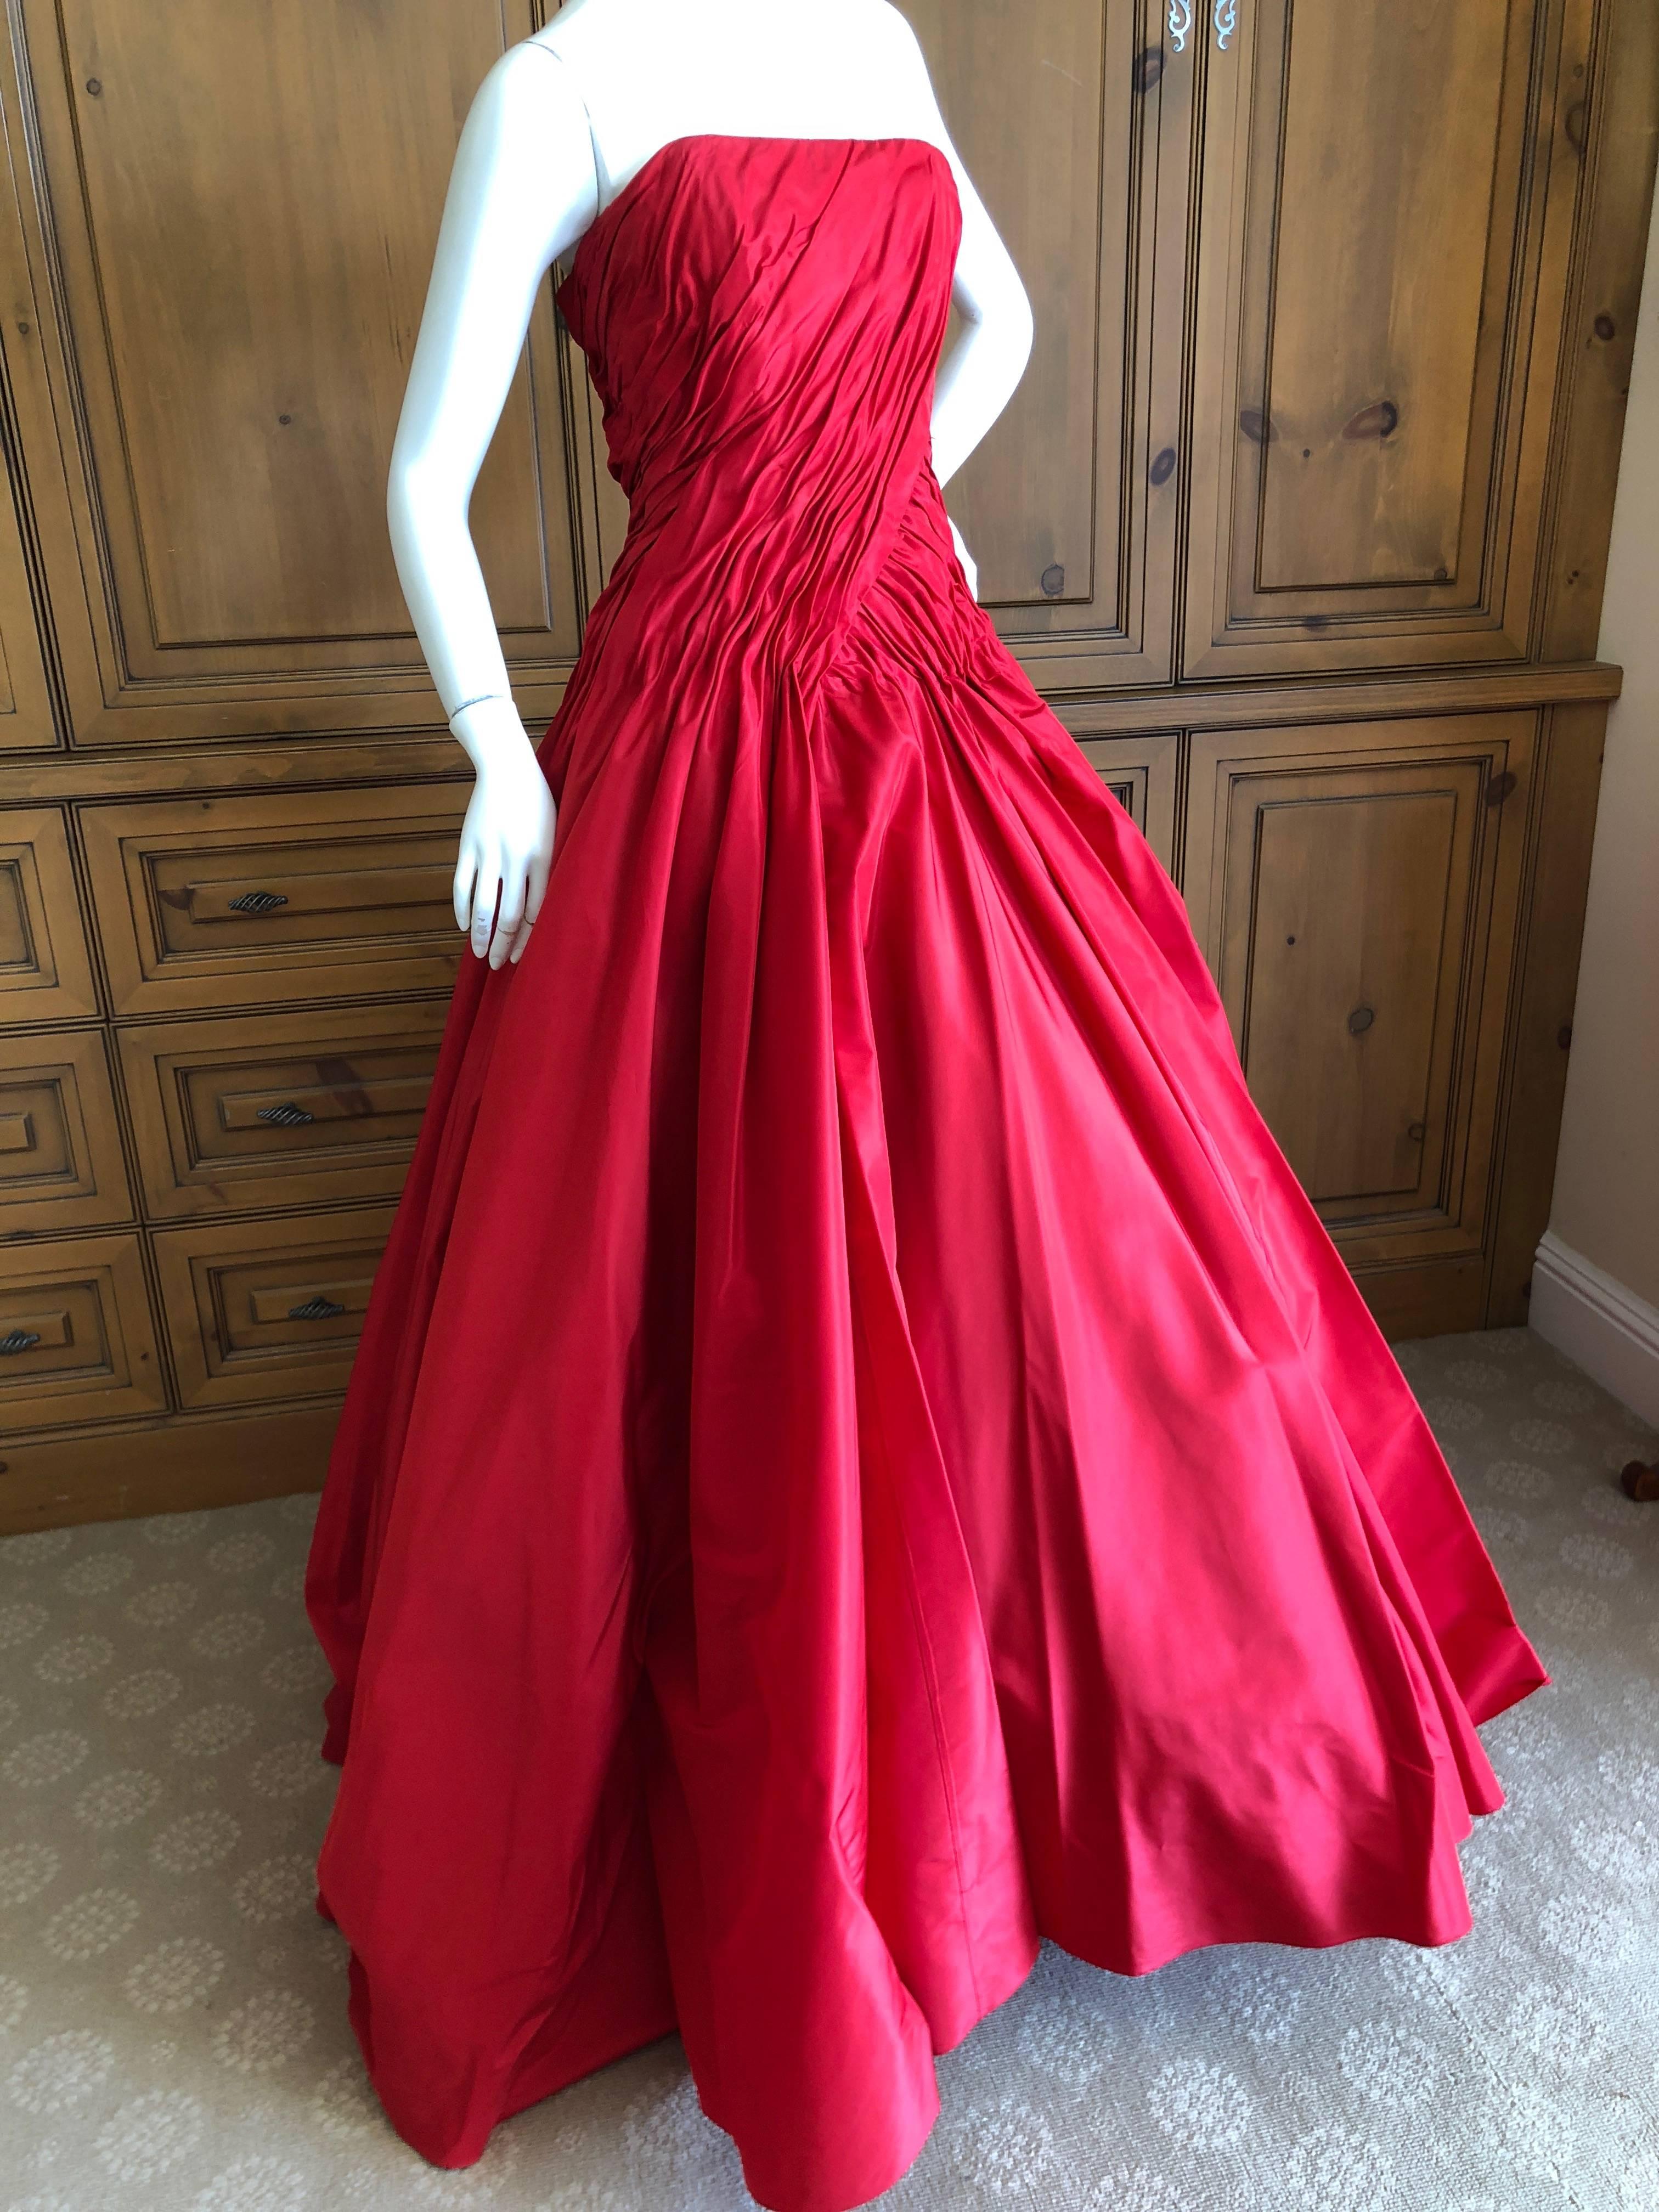 Wonderful red silk strapless evening gown from Vicky Teil Couture Paris.
This has a built in inner corset  and zips up the back.
There are four petticoats to hold the skirt full, and it stands by itself it is so fully constructed.
Please use the